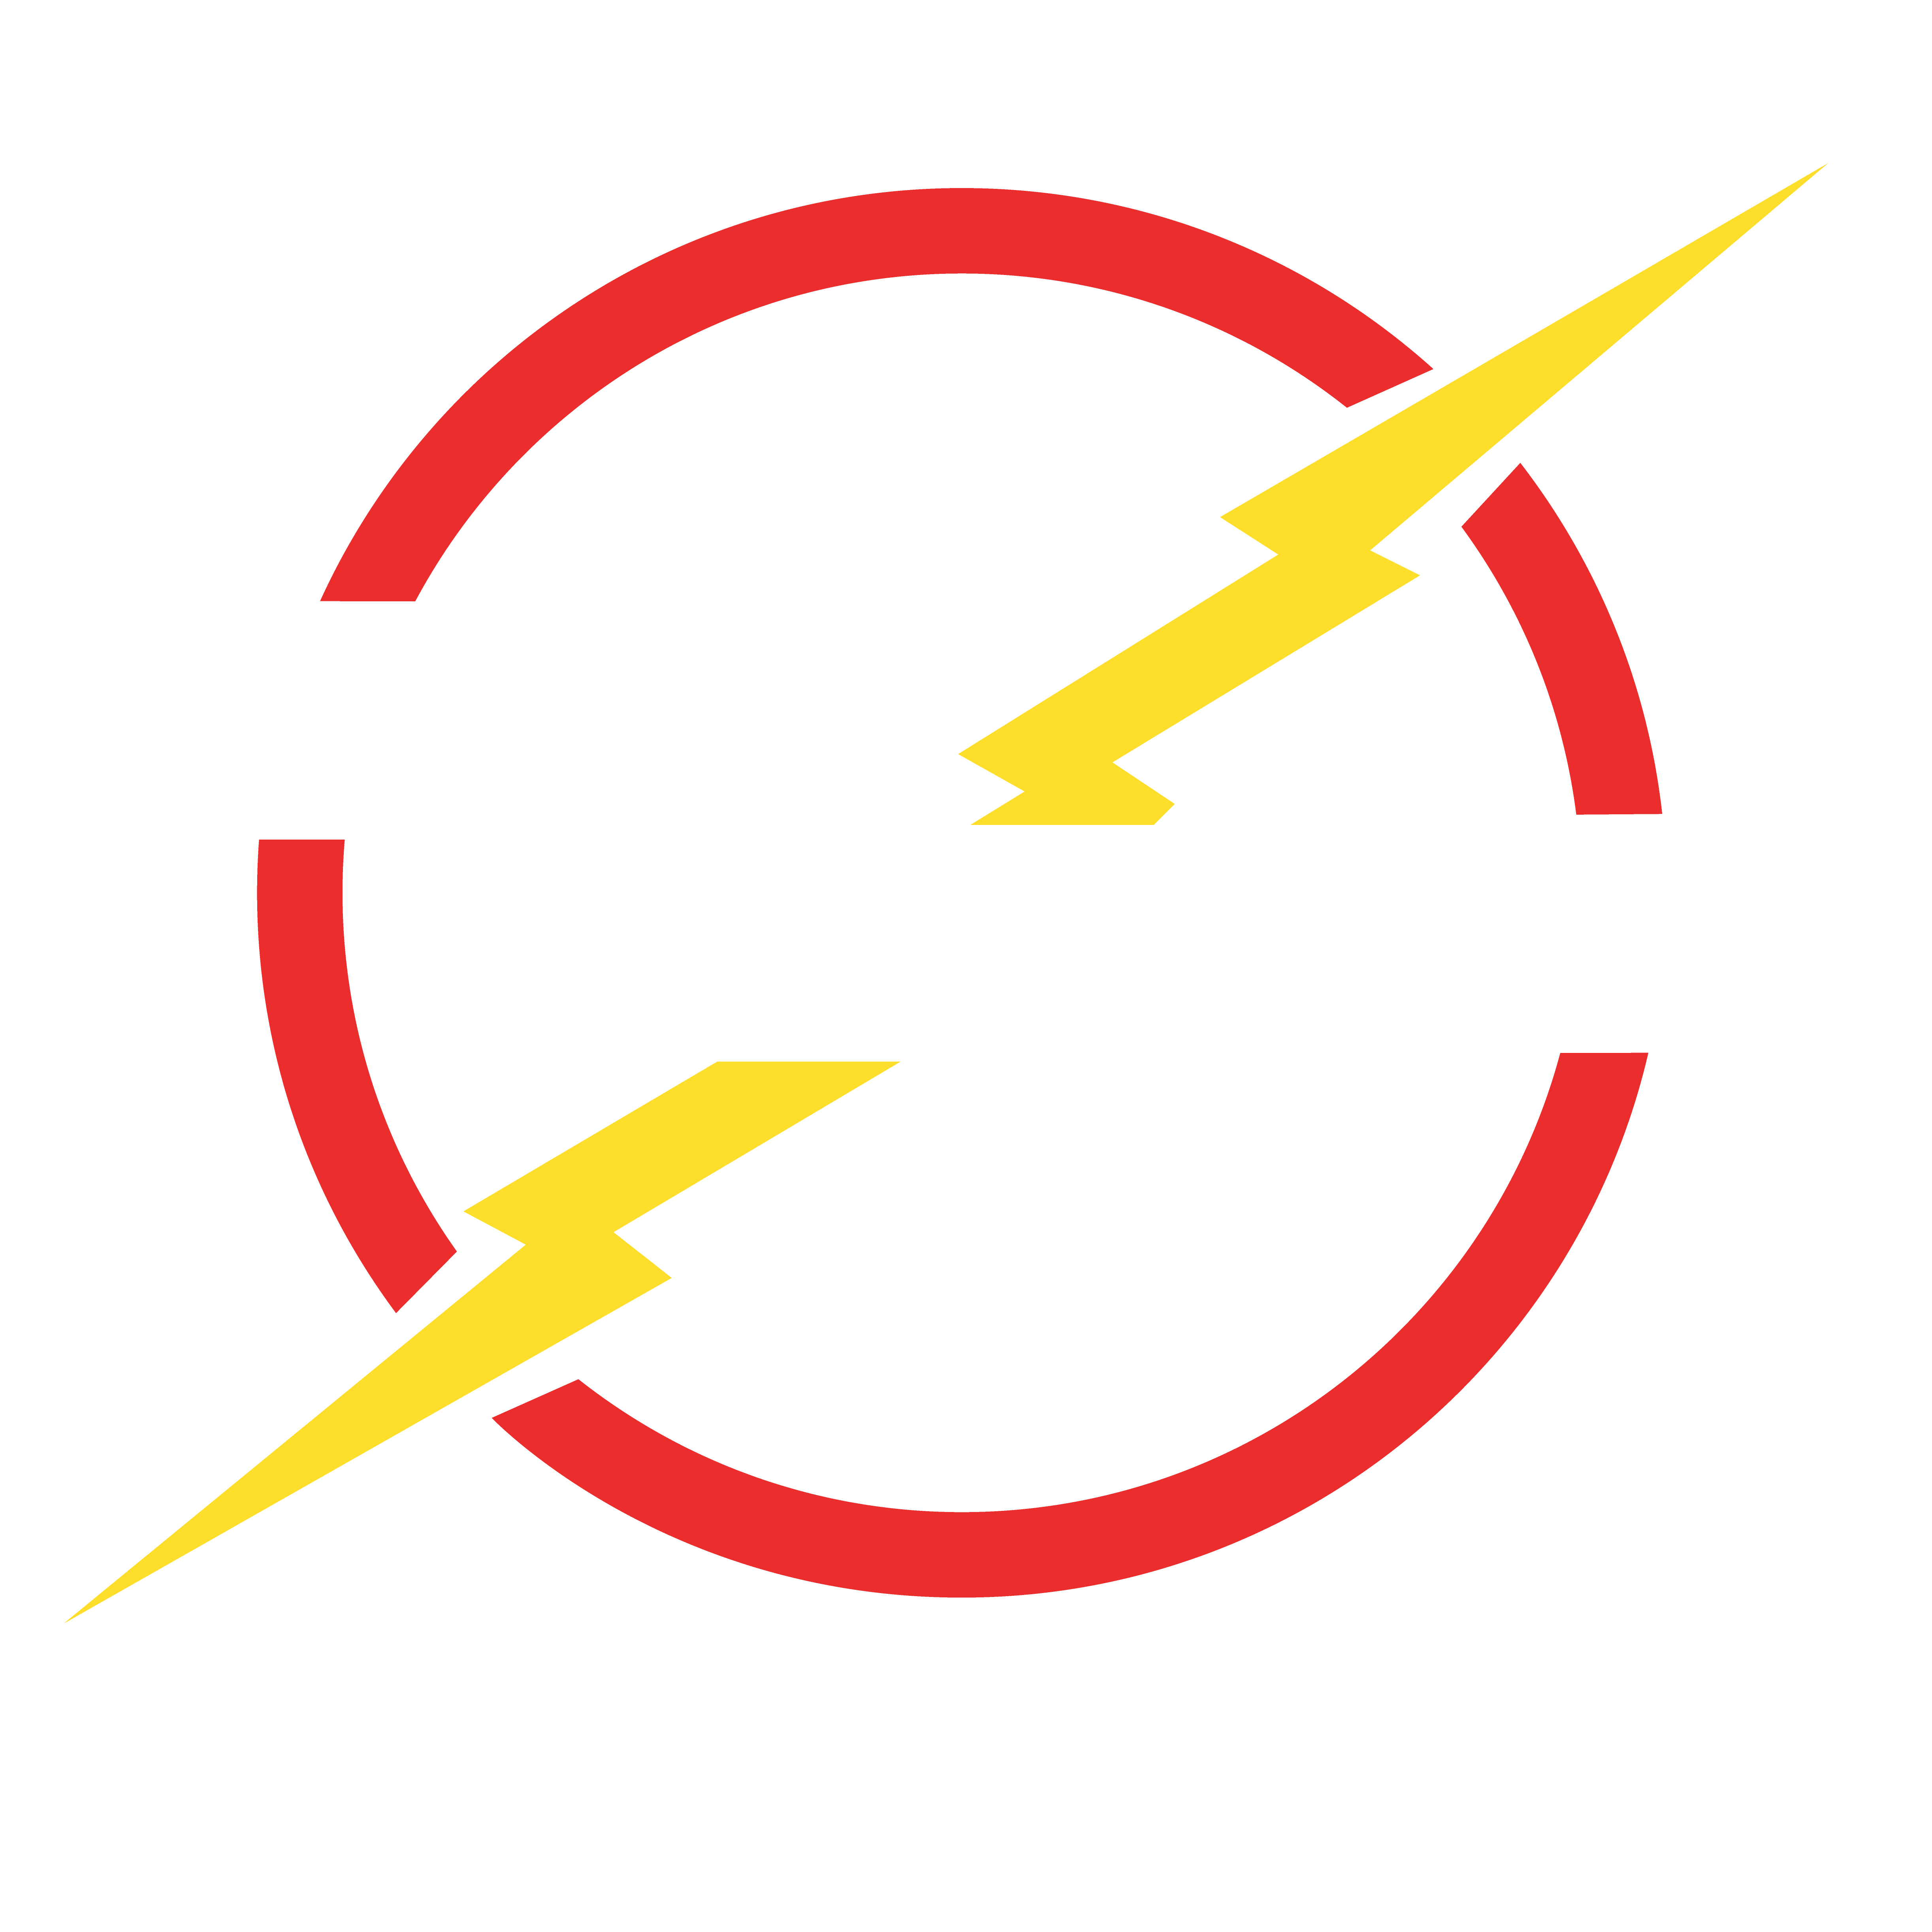 electric clipart electrical logo